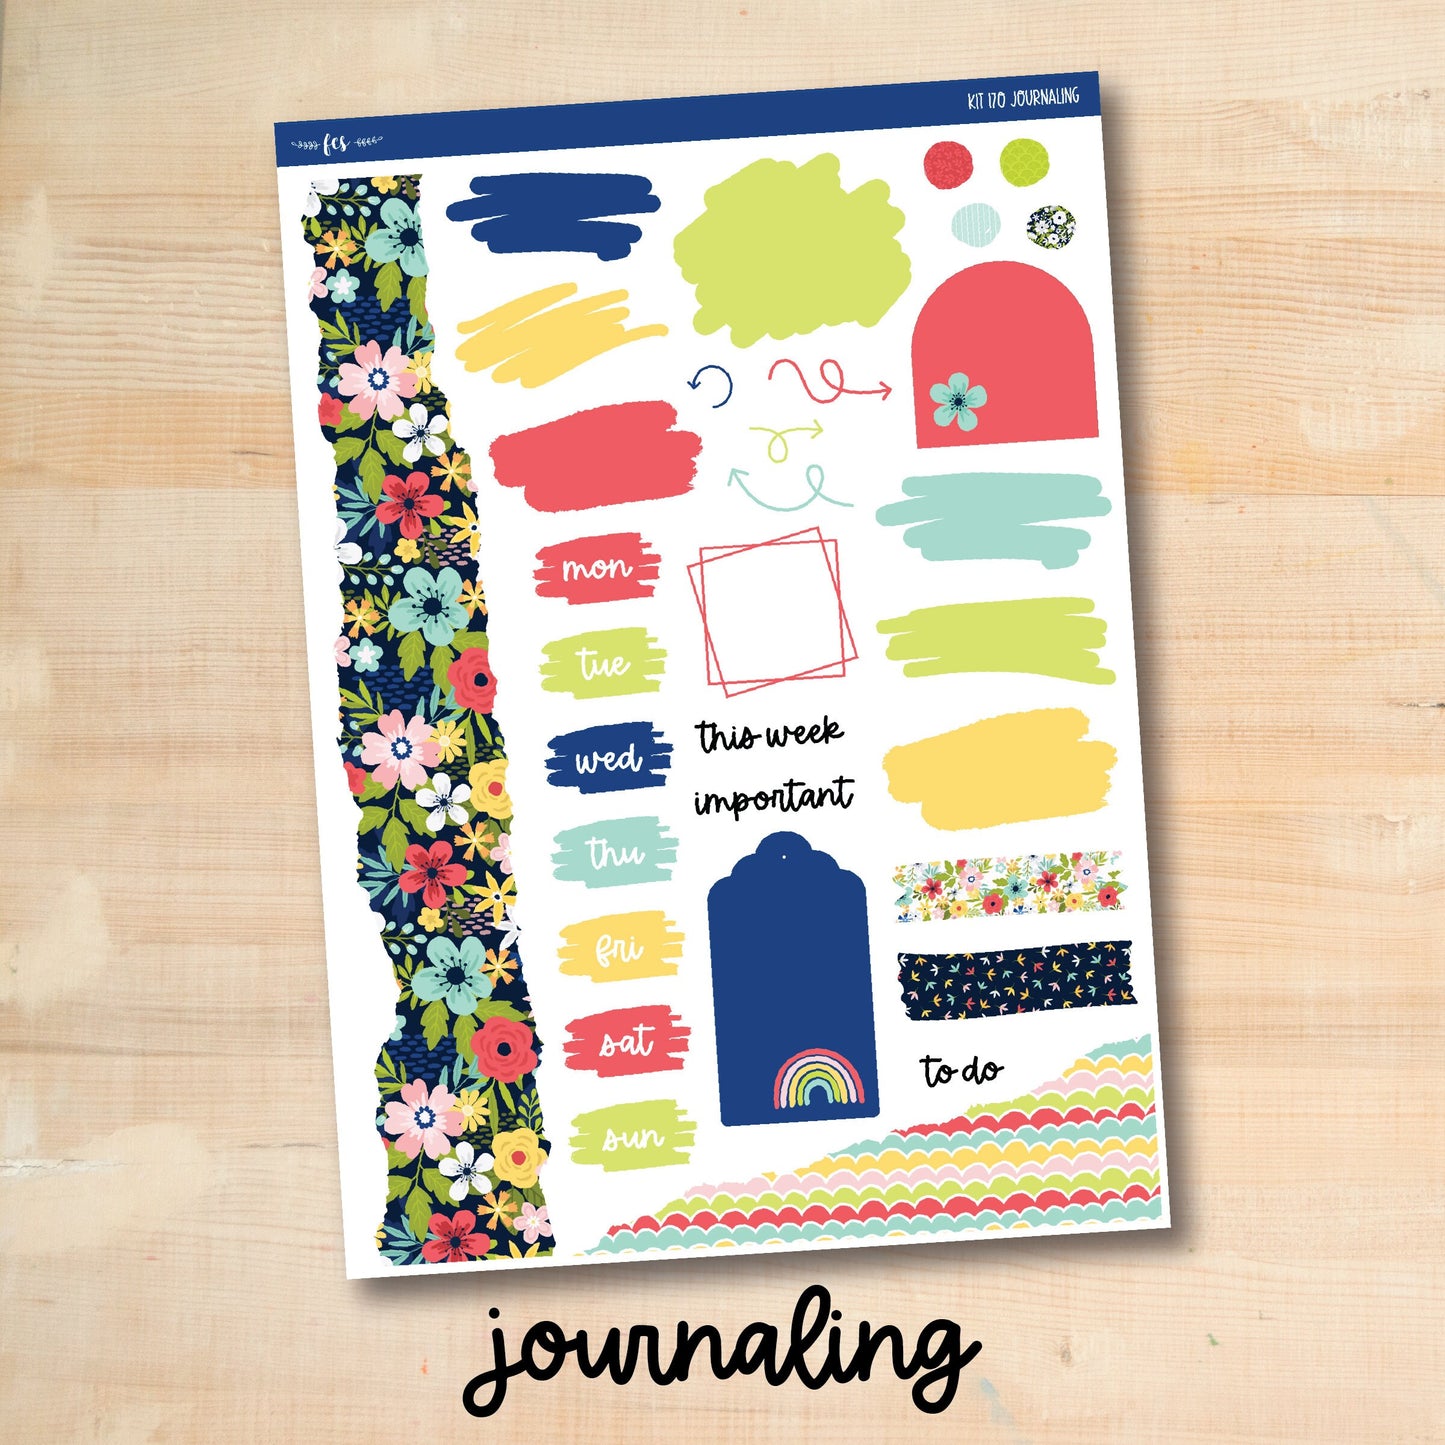 KIT-170 || HAPPY SUMMER weekly planner kit for Erin Condren, Plum Paper, MakseLife and more!